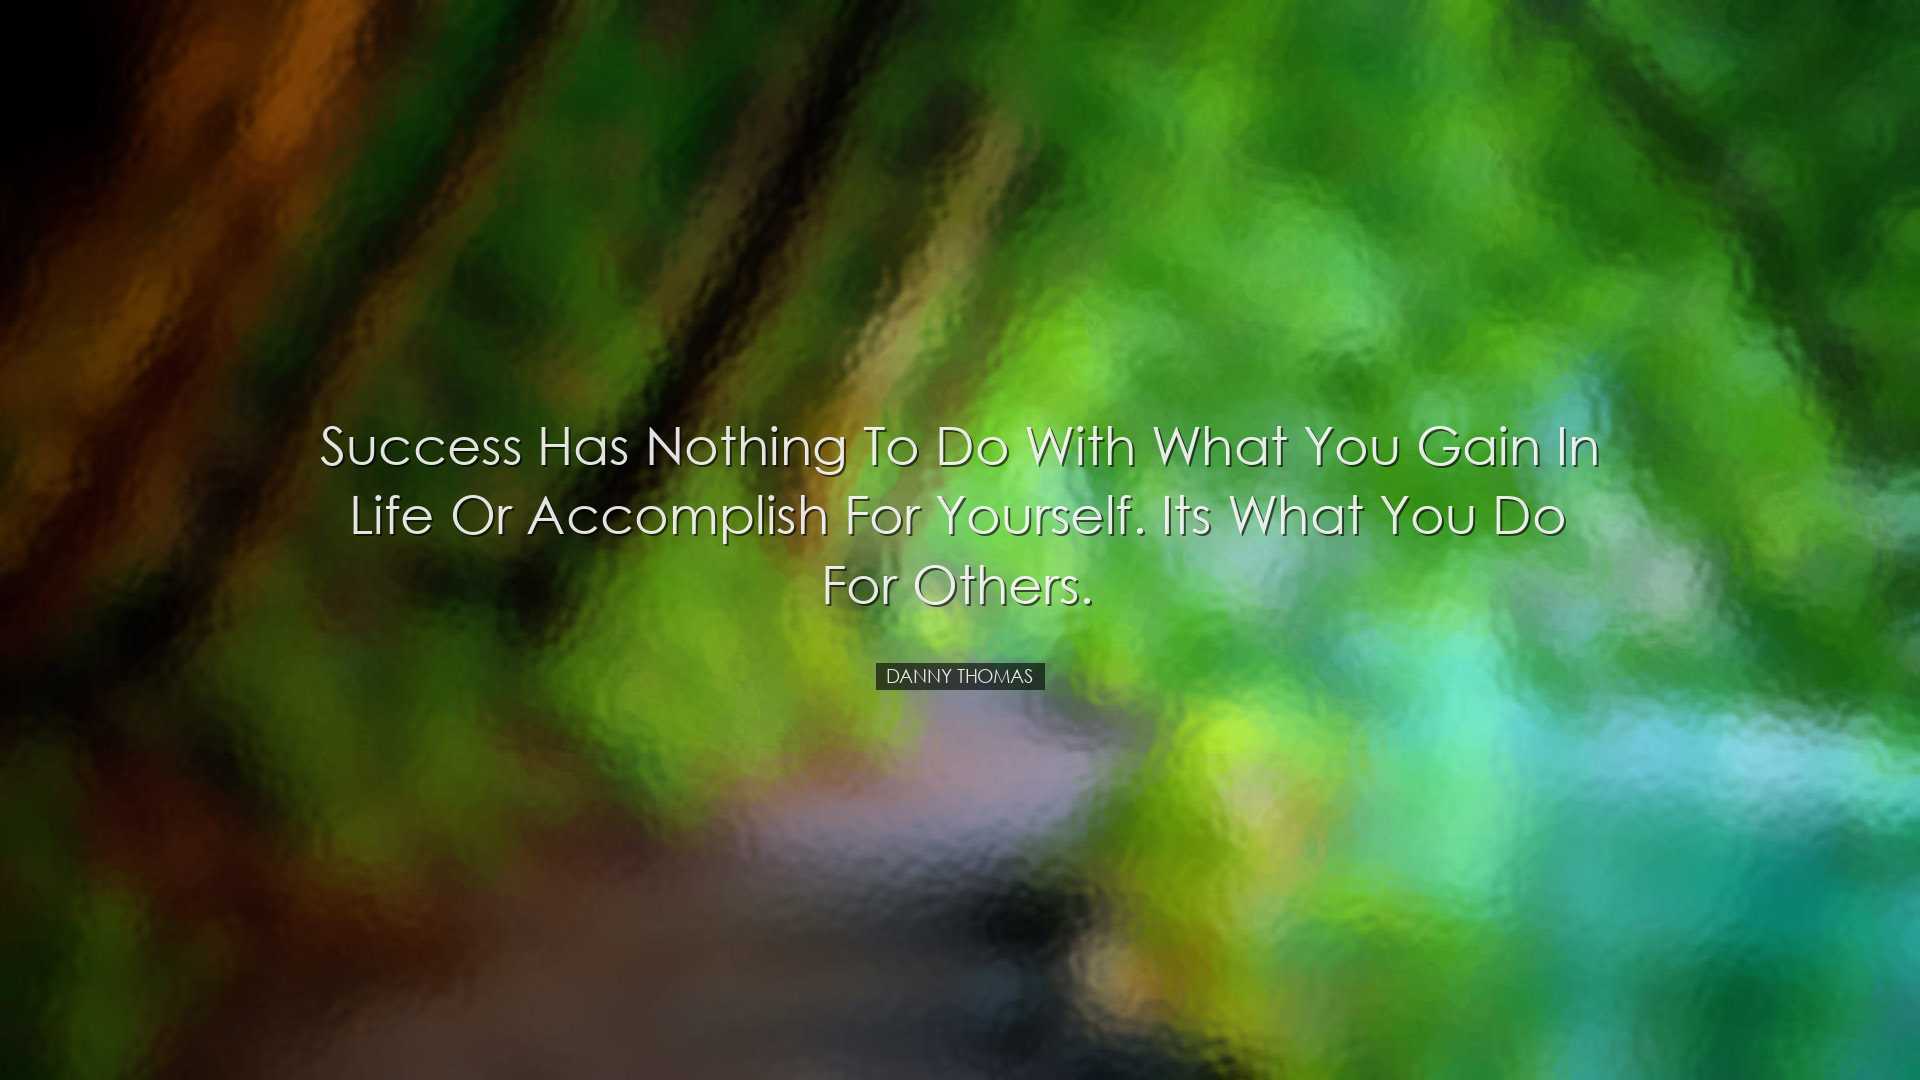 Success has nothing to do with what you gain in life or accomplish